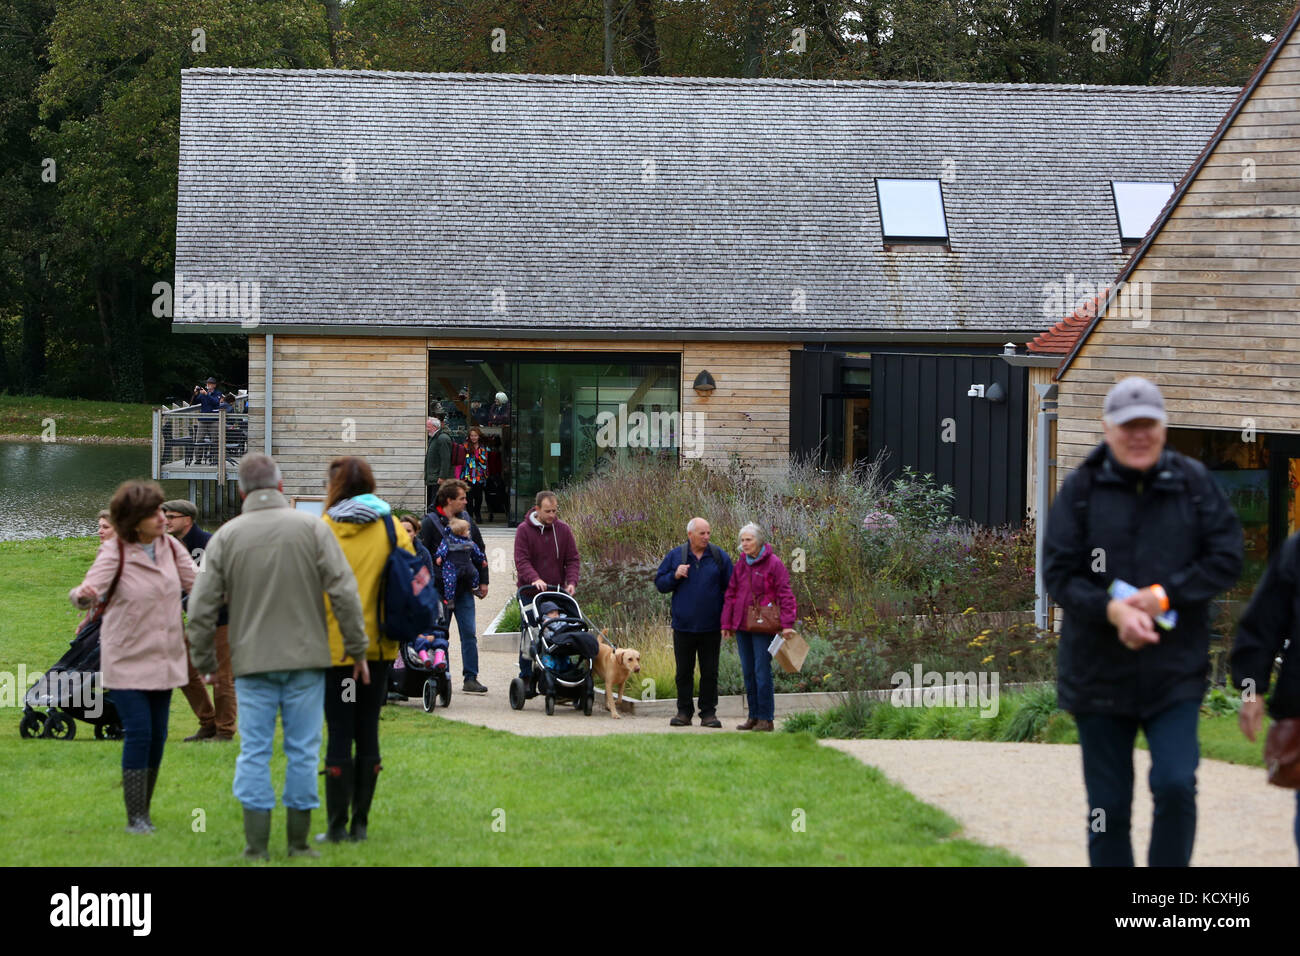 Autumn Countryside Show at Weald & Downland Museum Singleton, Chichester, West Sussex. Stock Photo